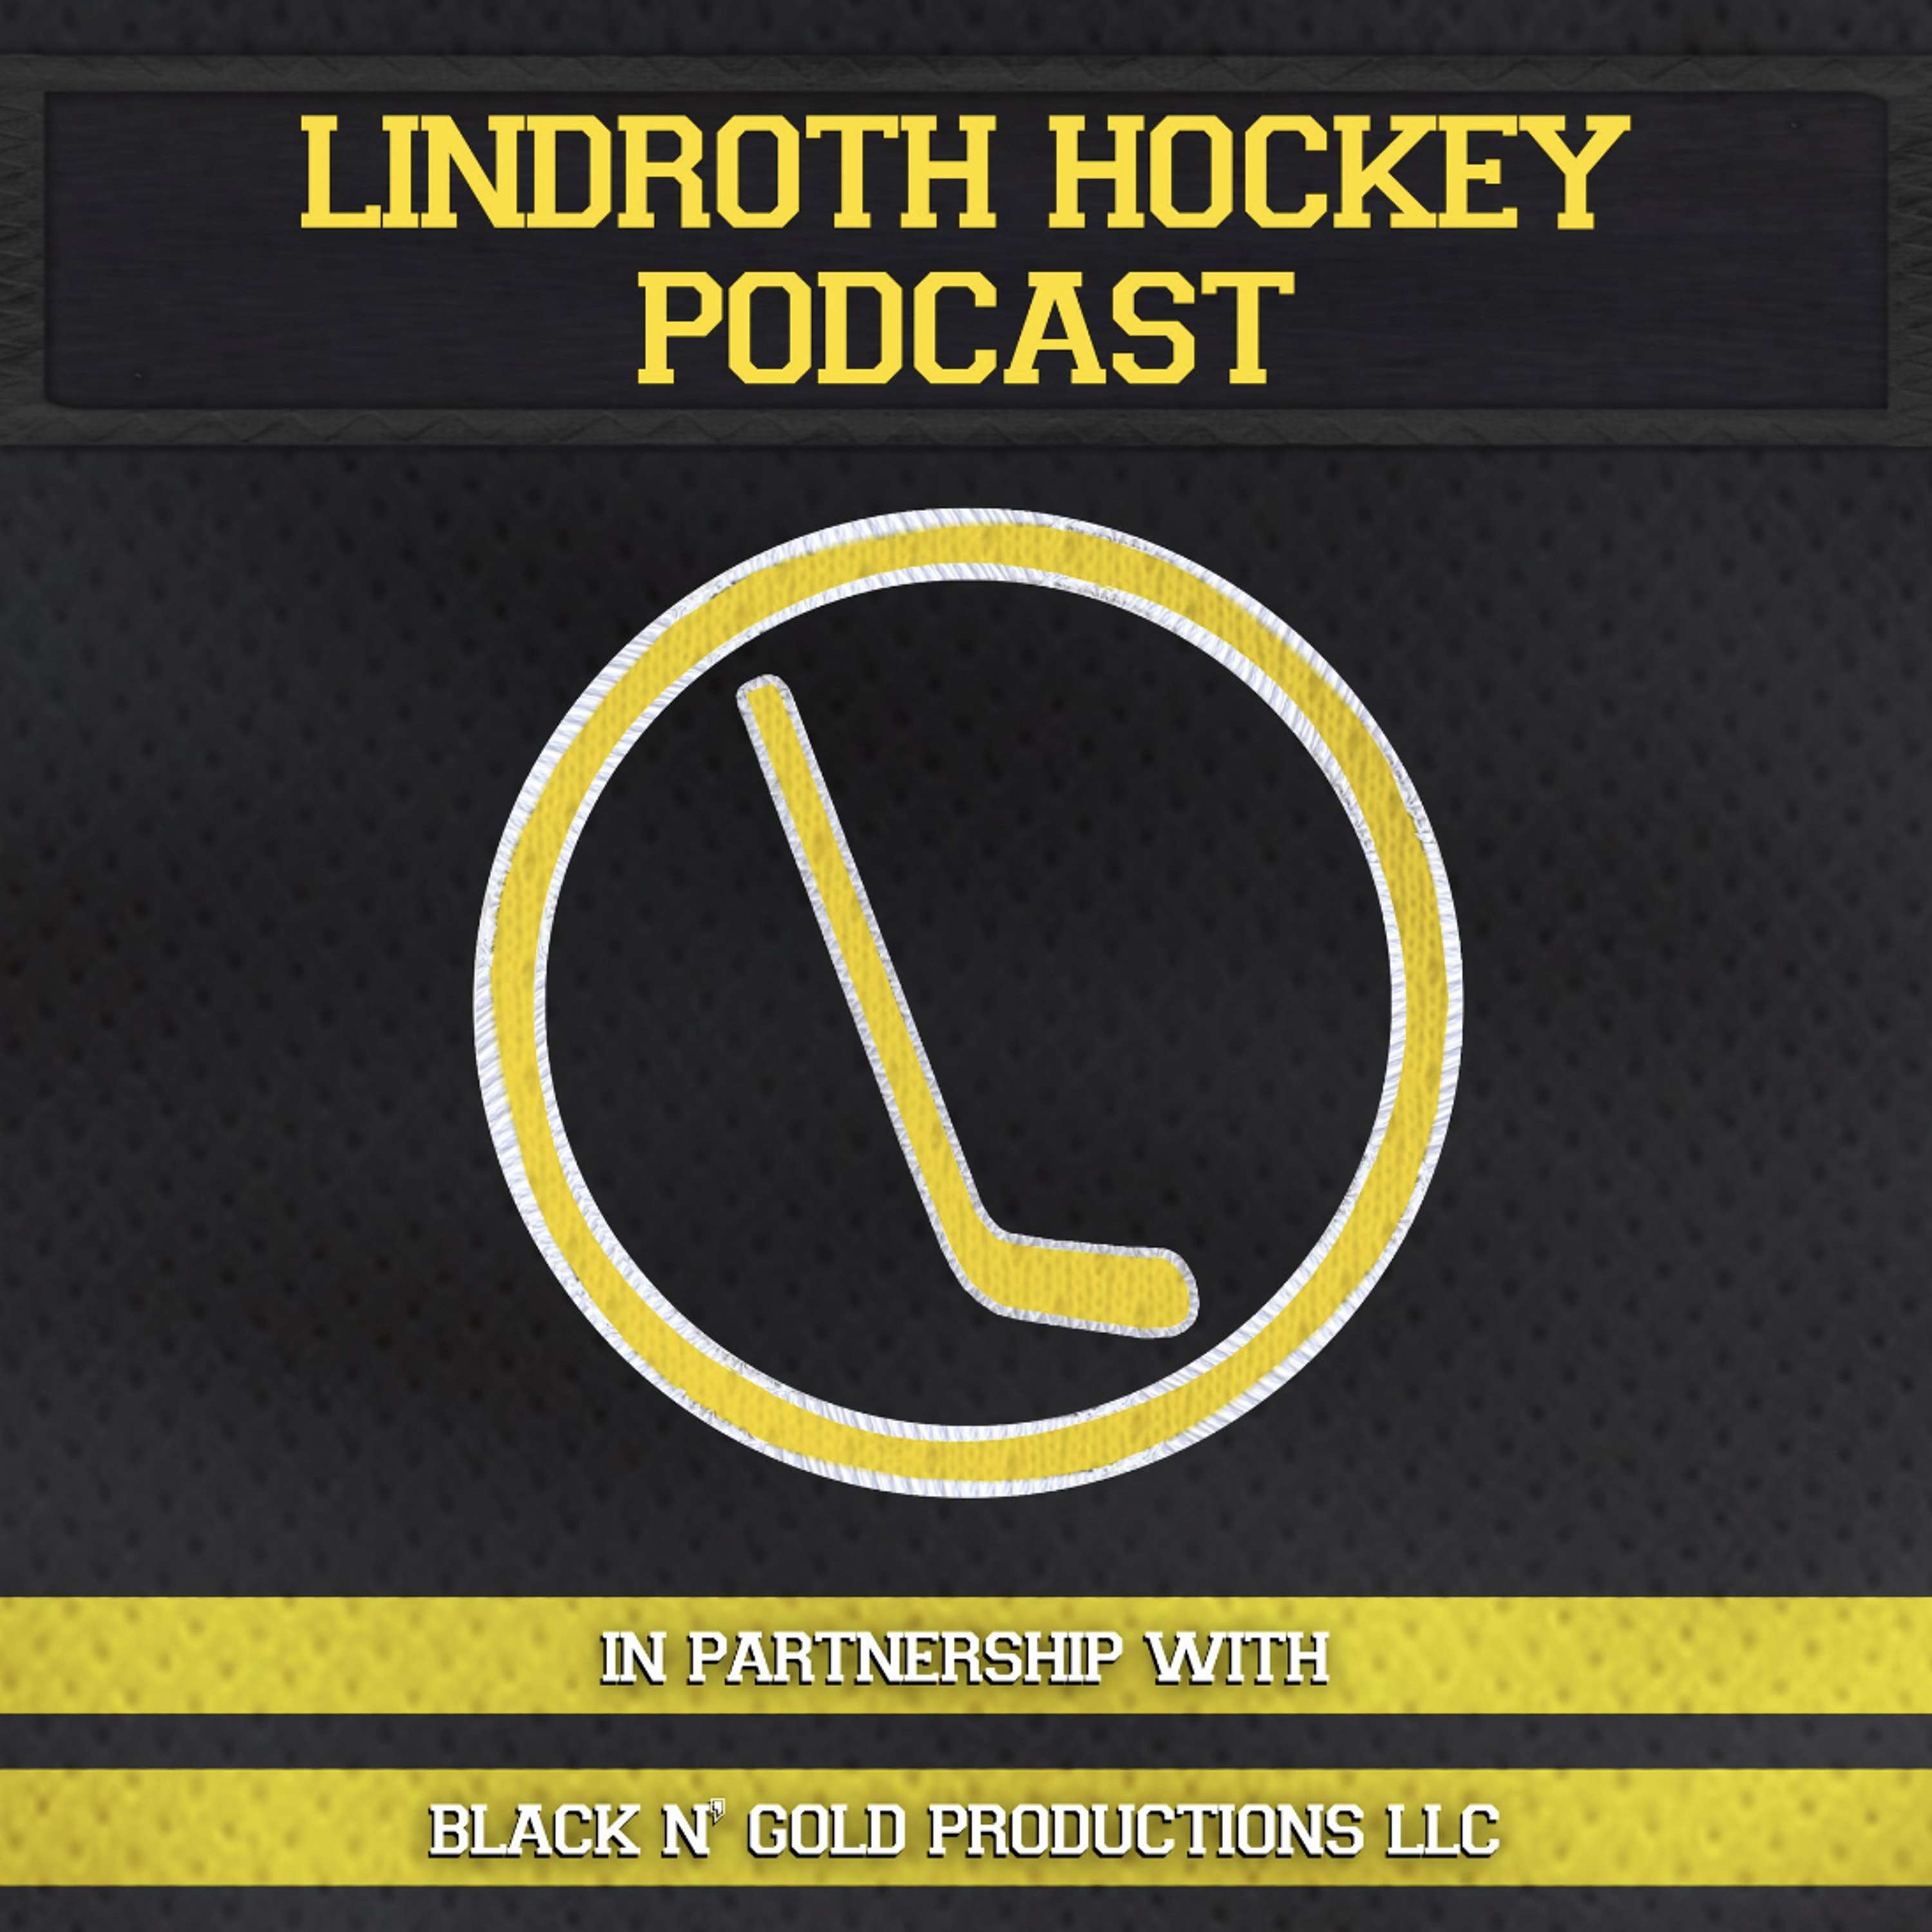 Episode 77: Boston Bruins/Playoff Bonus Featuring Special Guest Dave Capuano